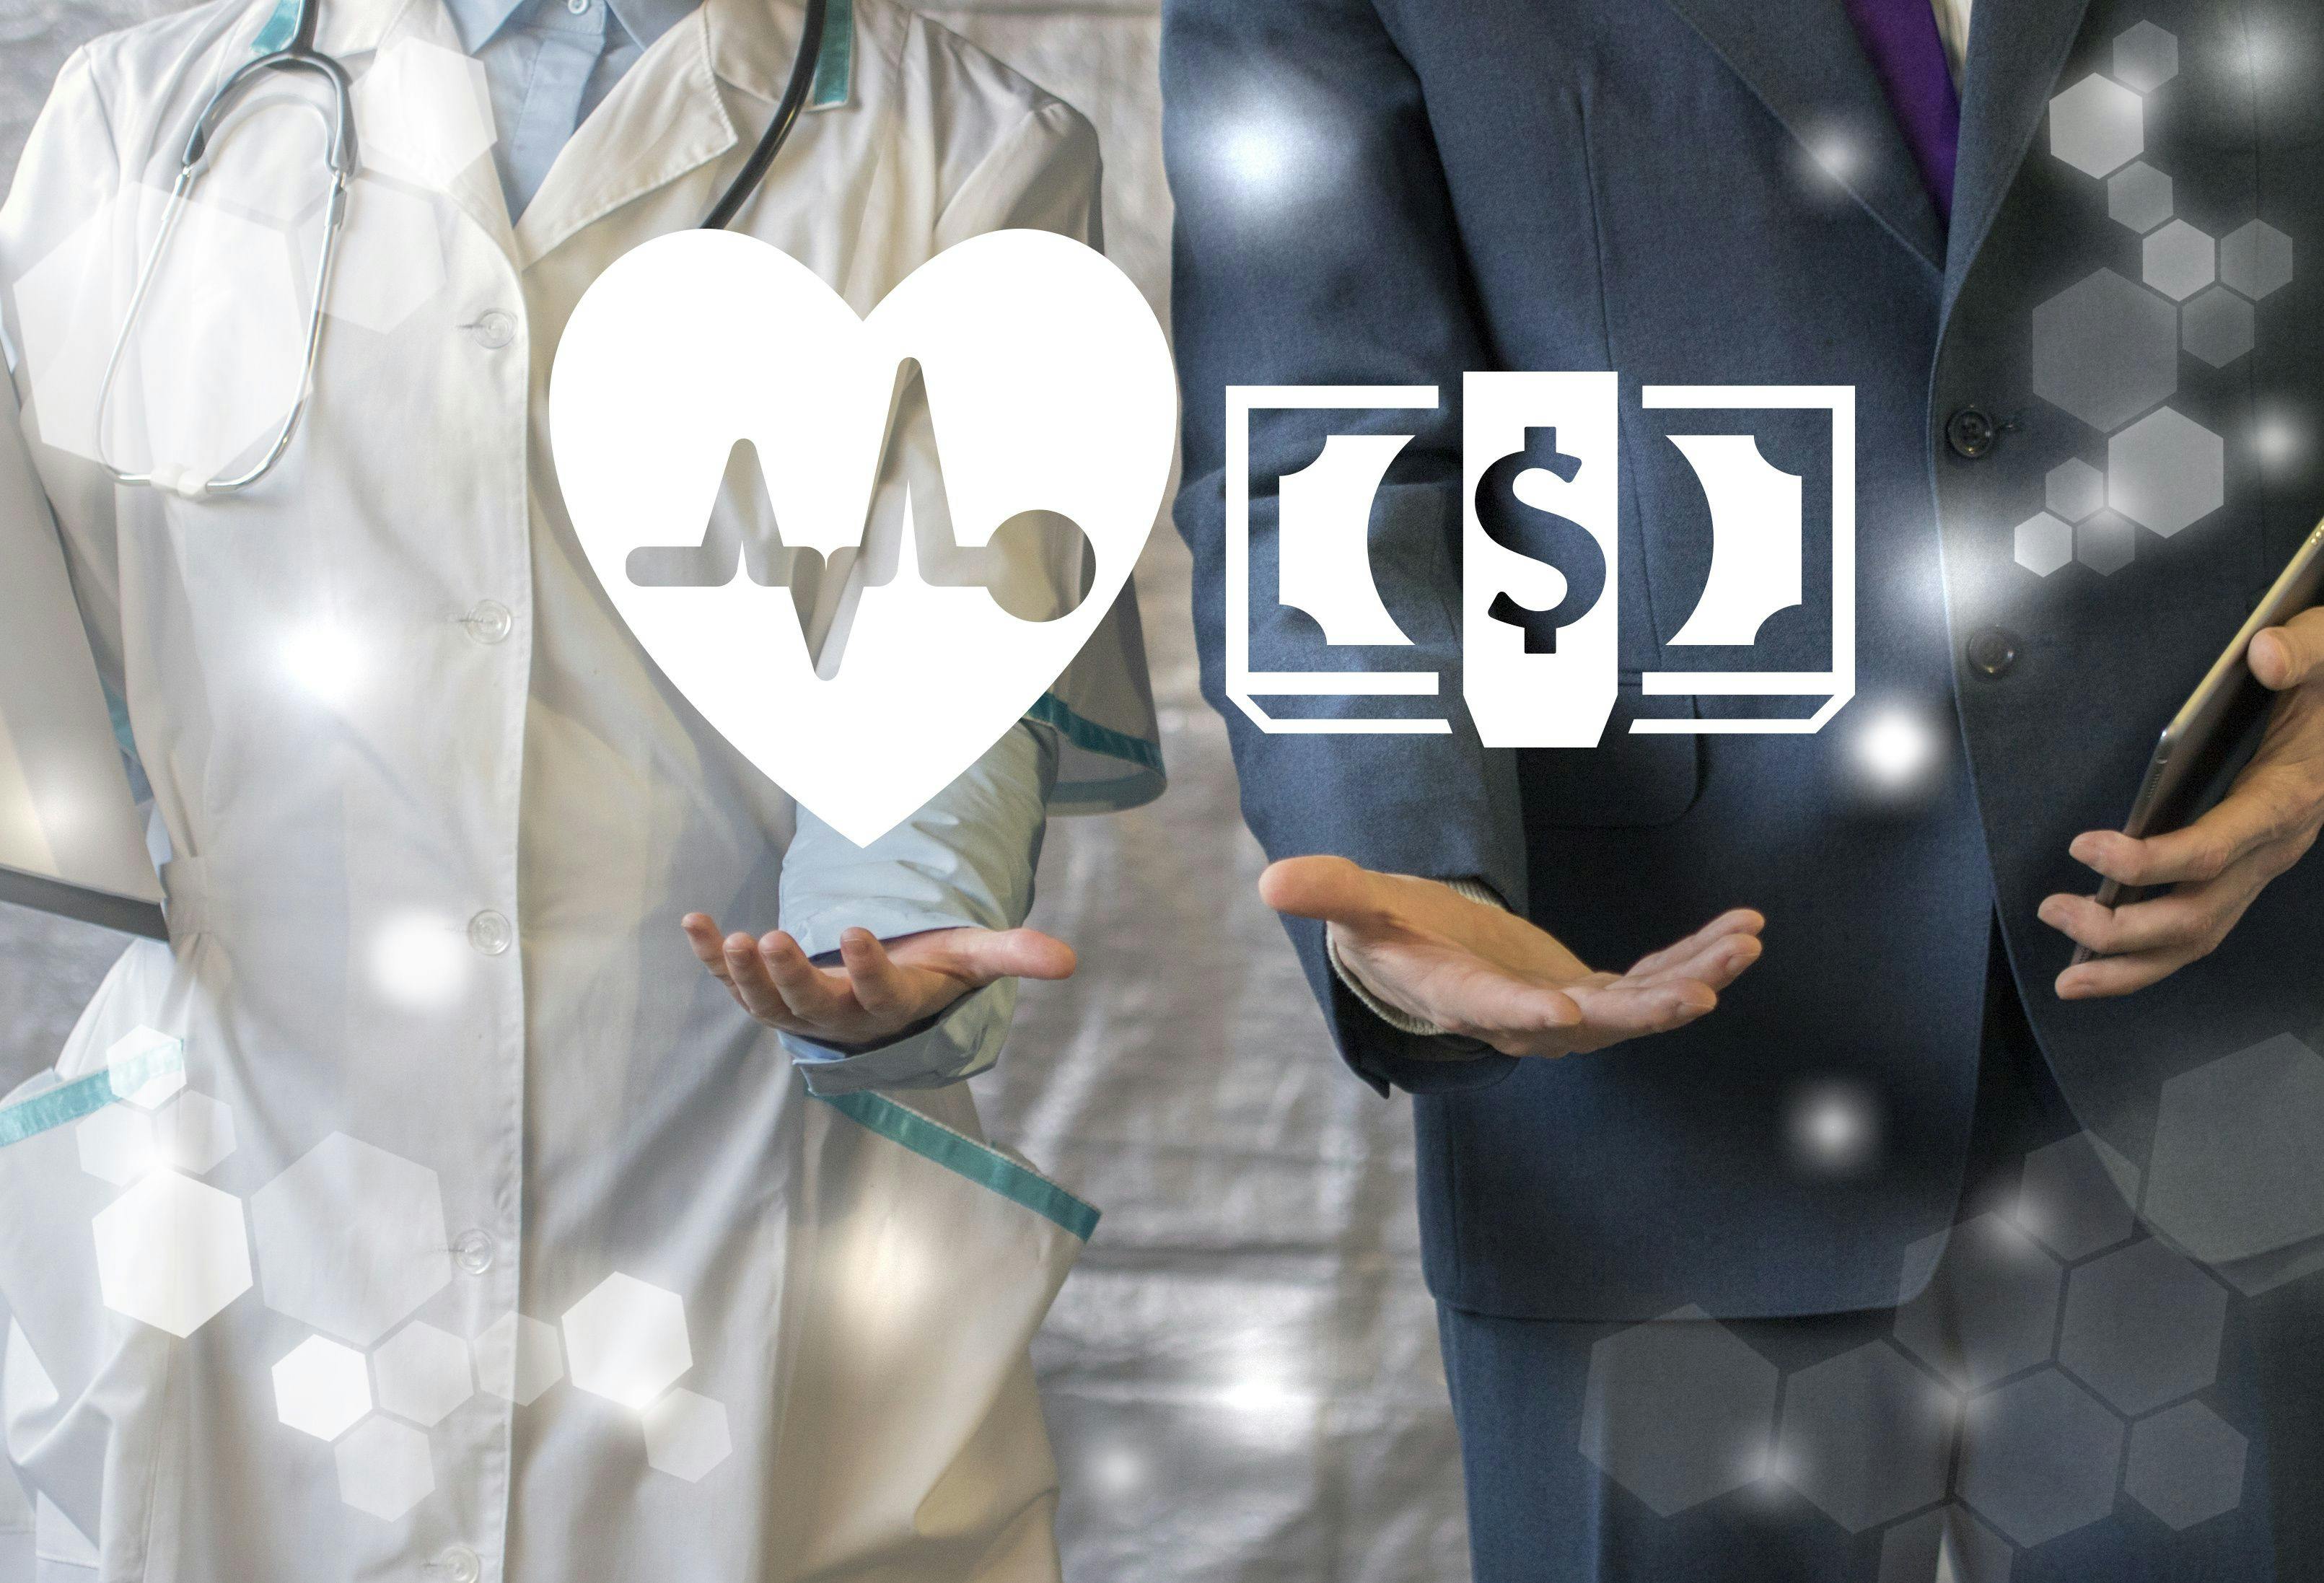 How Today’s Hospitals Need to Financially Prepare for a New Normal as a Result of COVID-19